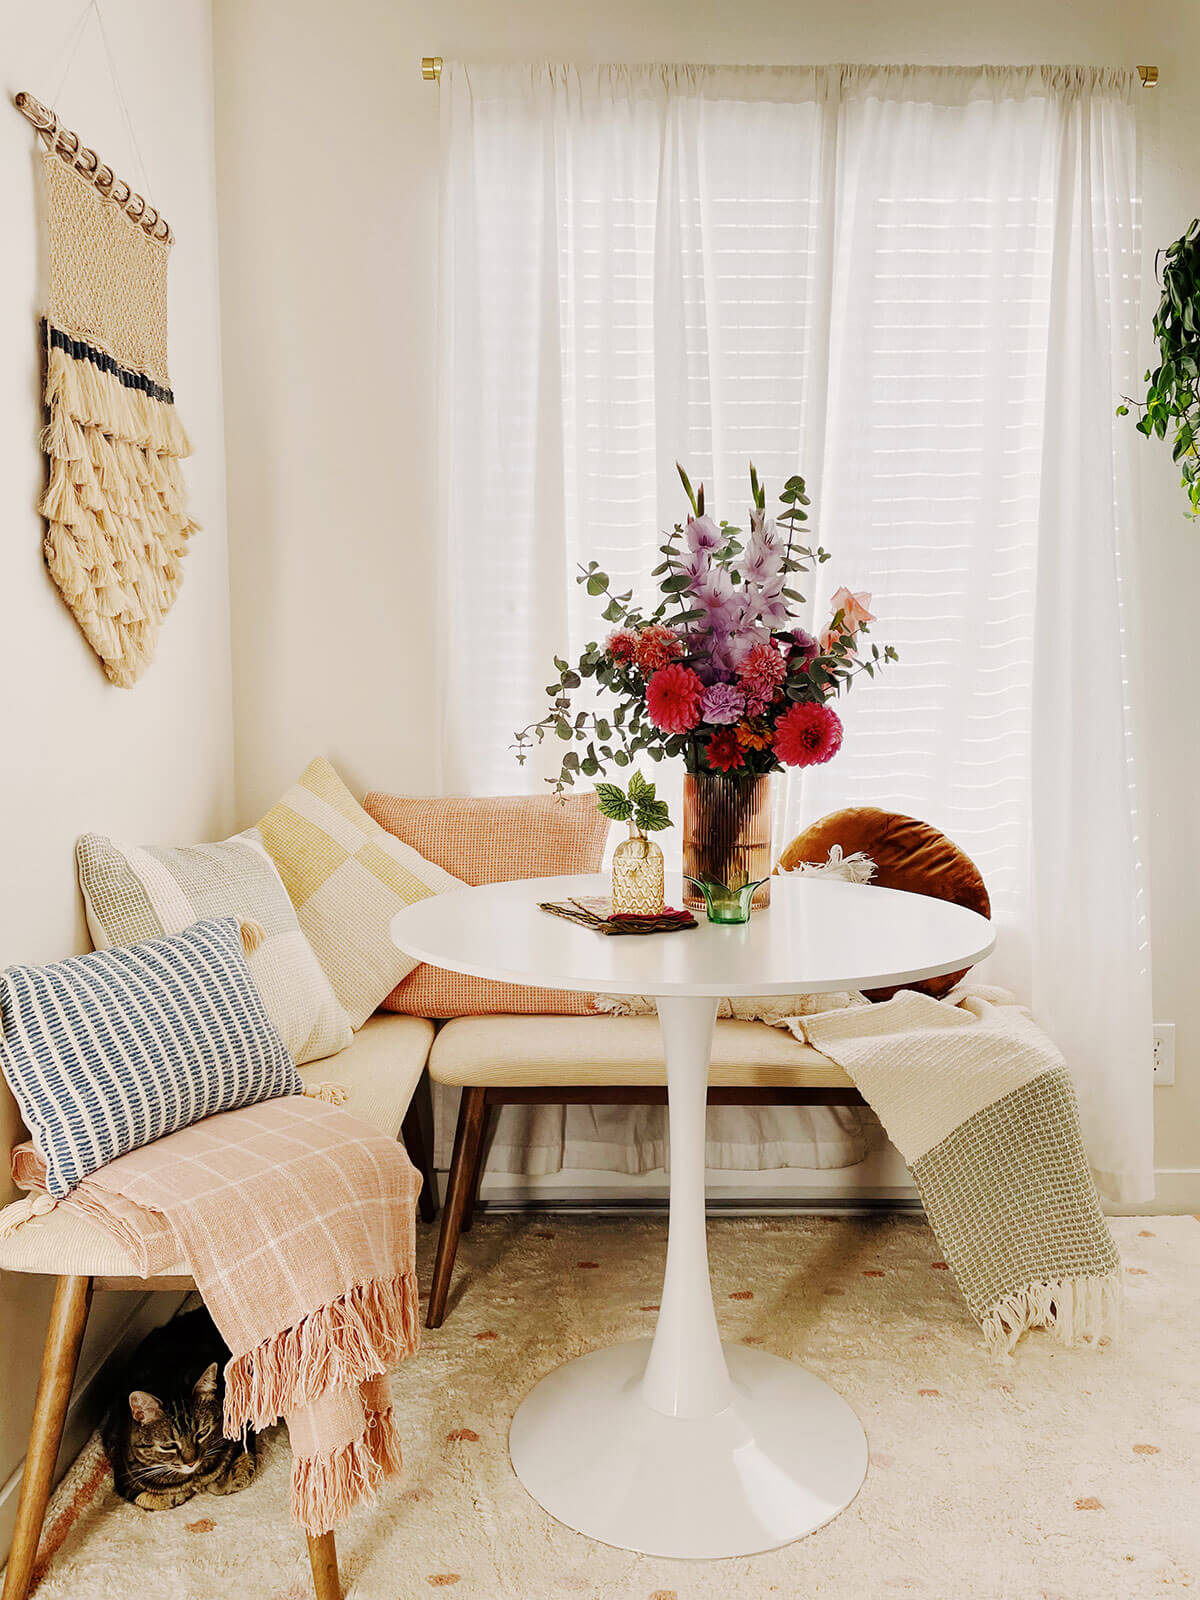 A light and bright dining nook with colorful pillows